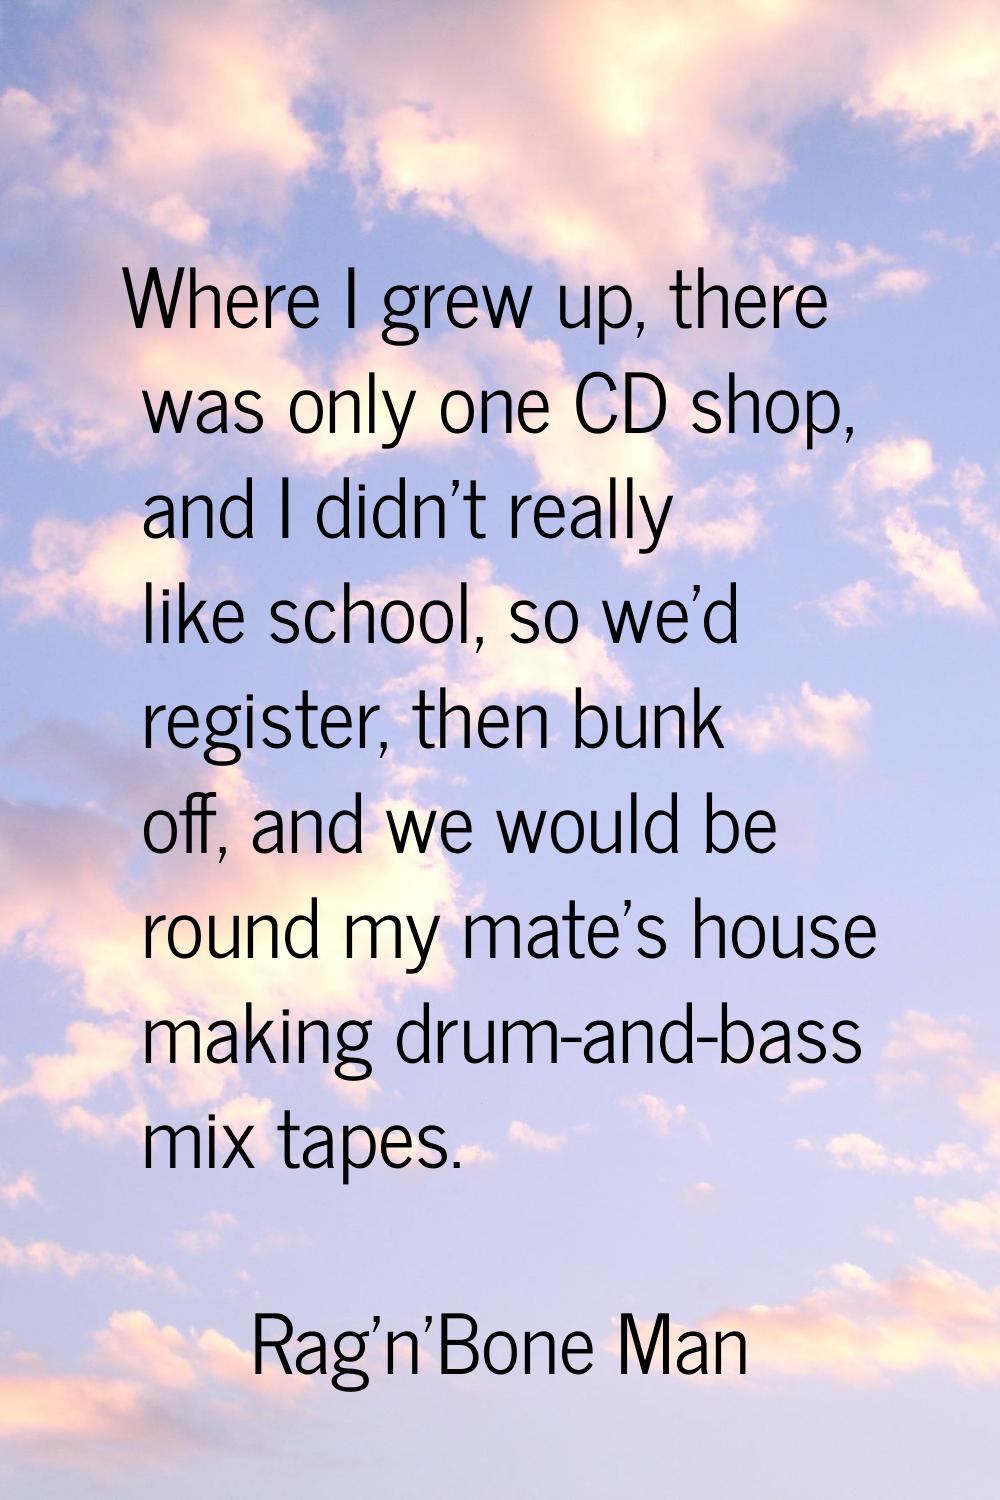 Where I grew up, there was only one CD shop, and I didn't really like school, so we'd register, the